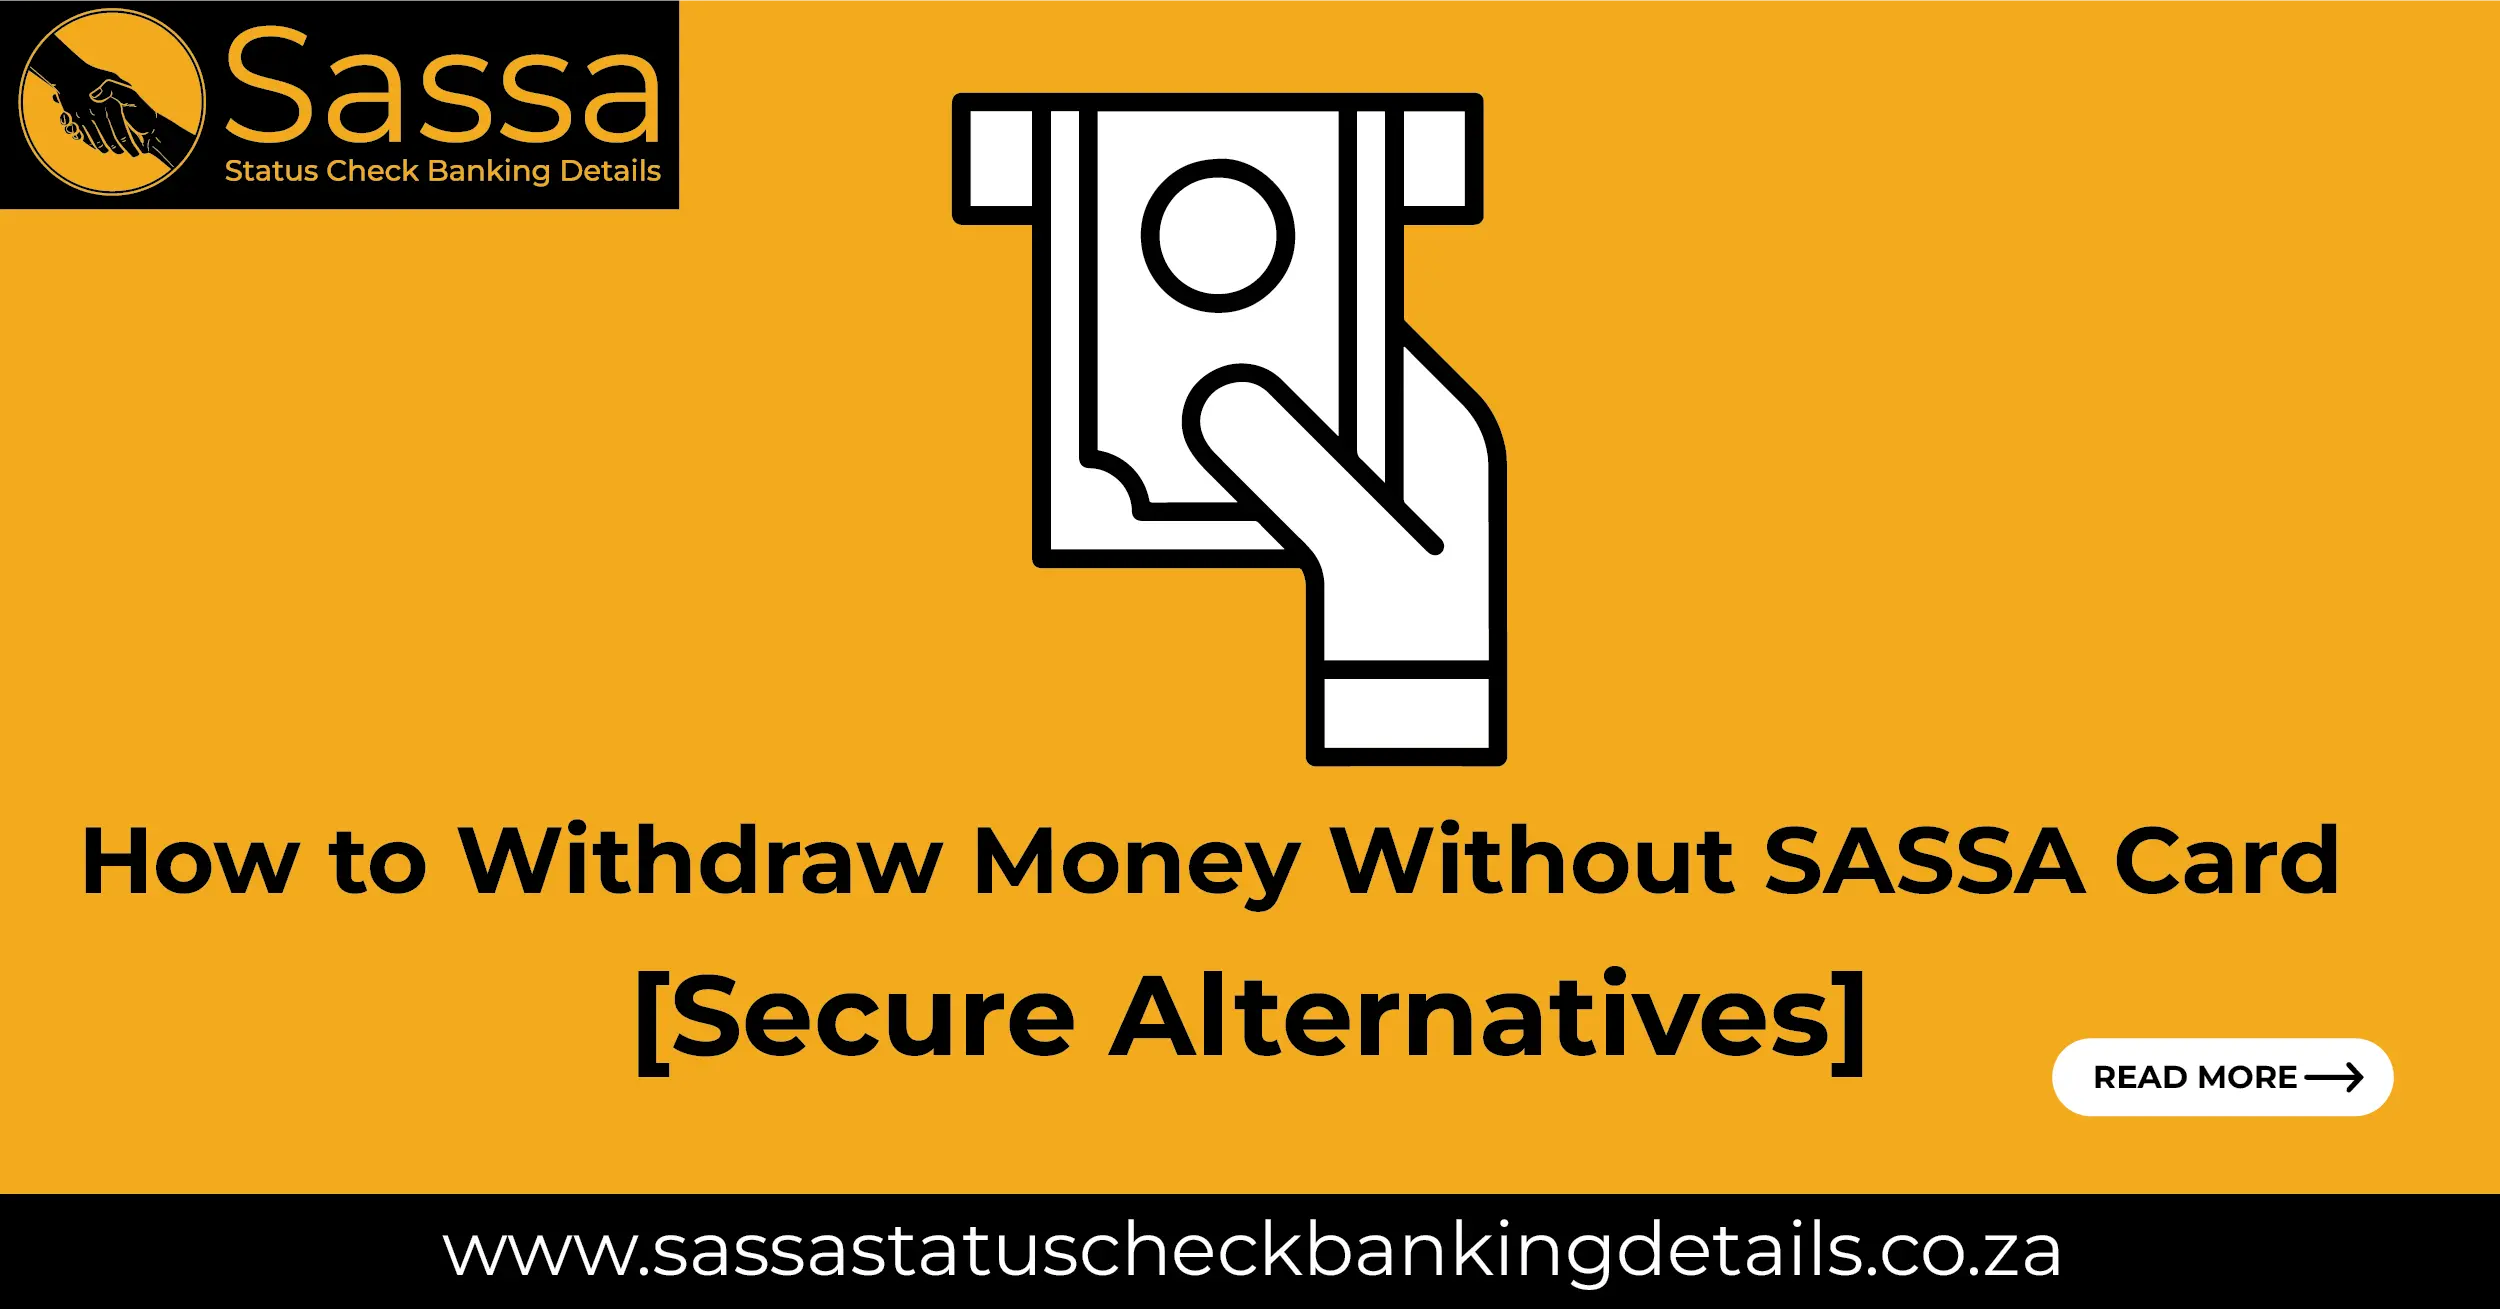 How to Withdraw Money Without SASSA Card – Secure Alternatives